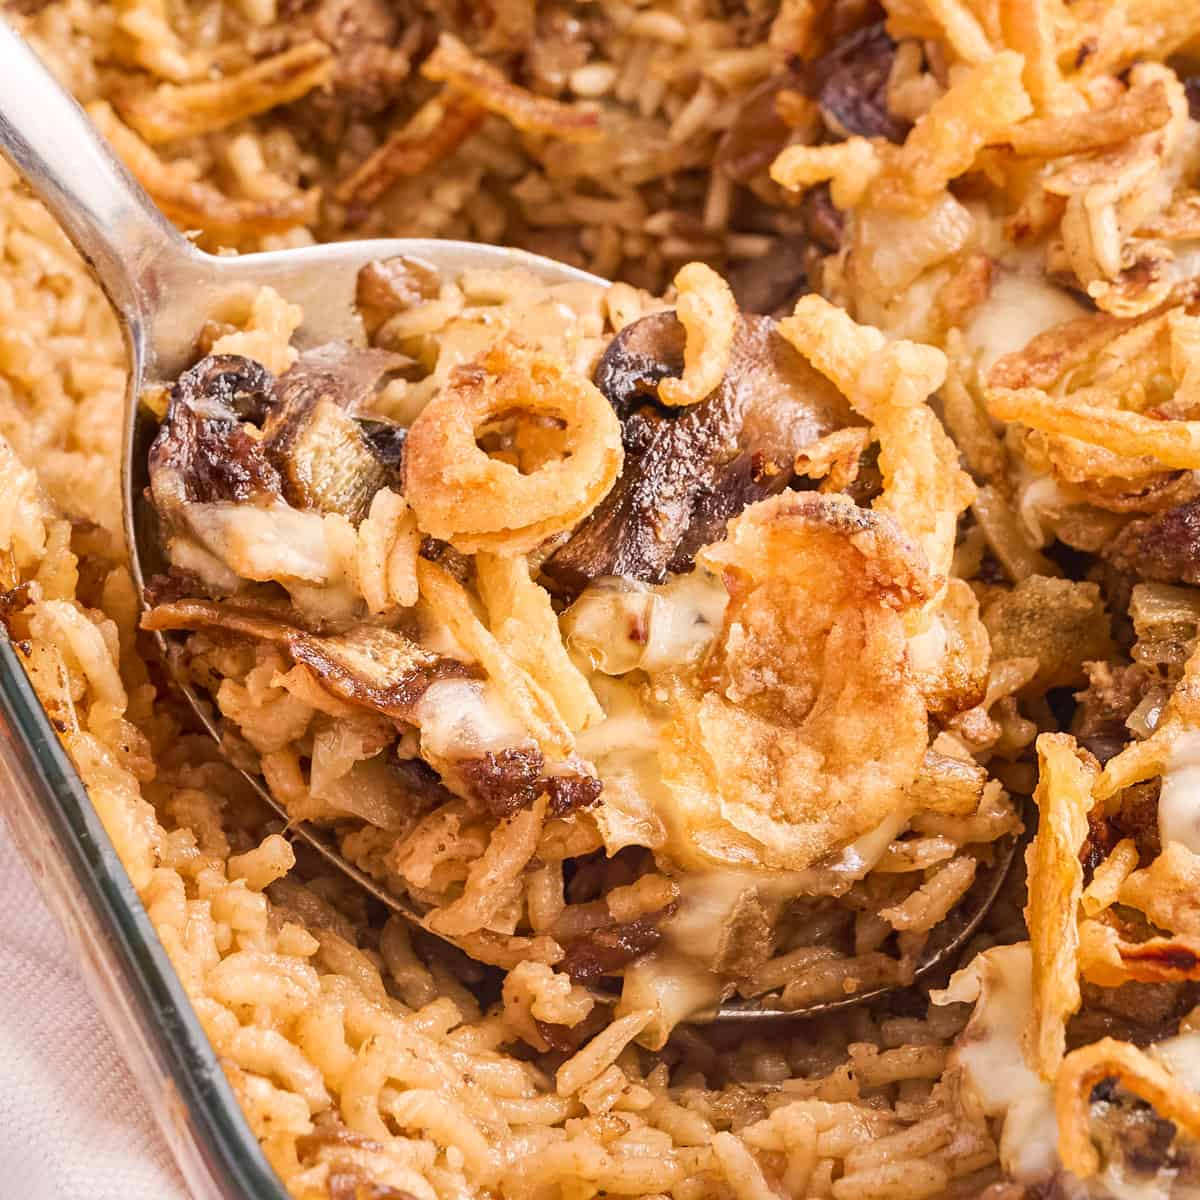 https://www.thechunkychef.com/wp-content/uploads/2023/02/Beefy-French-Onion-Baked-Rice-Casserole-recipe-card.jpg